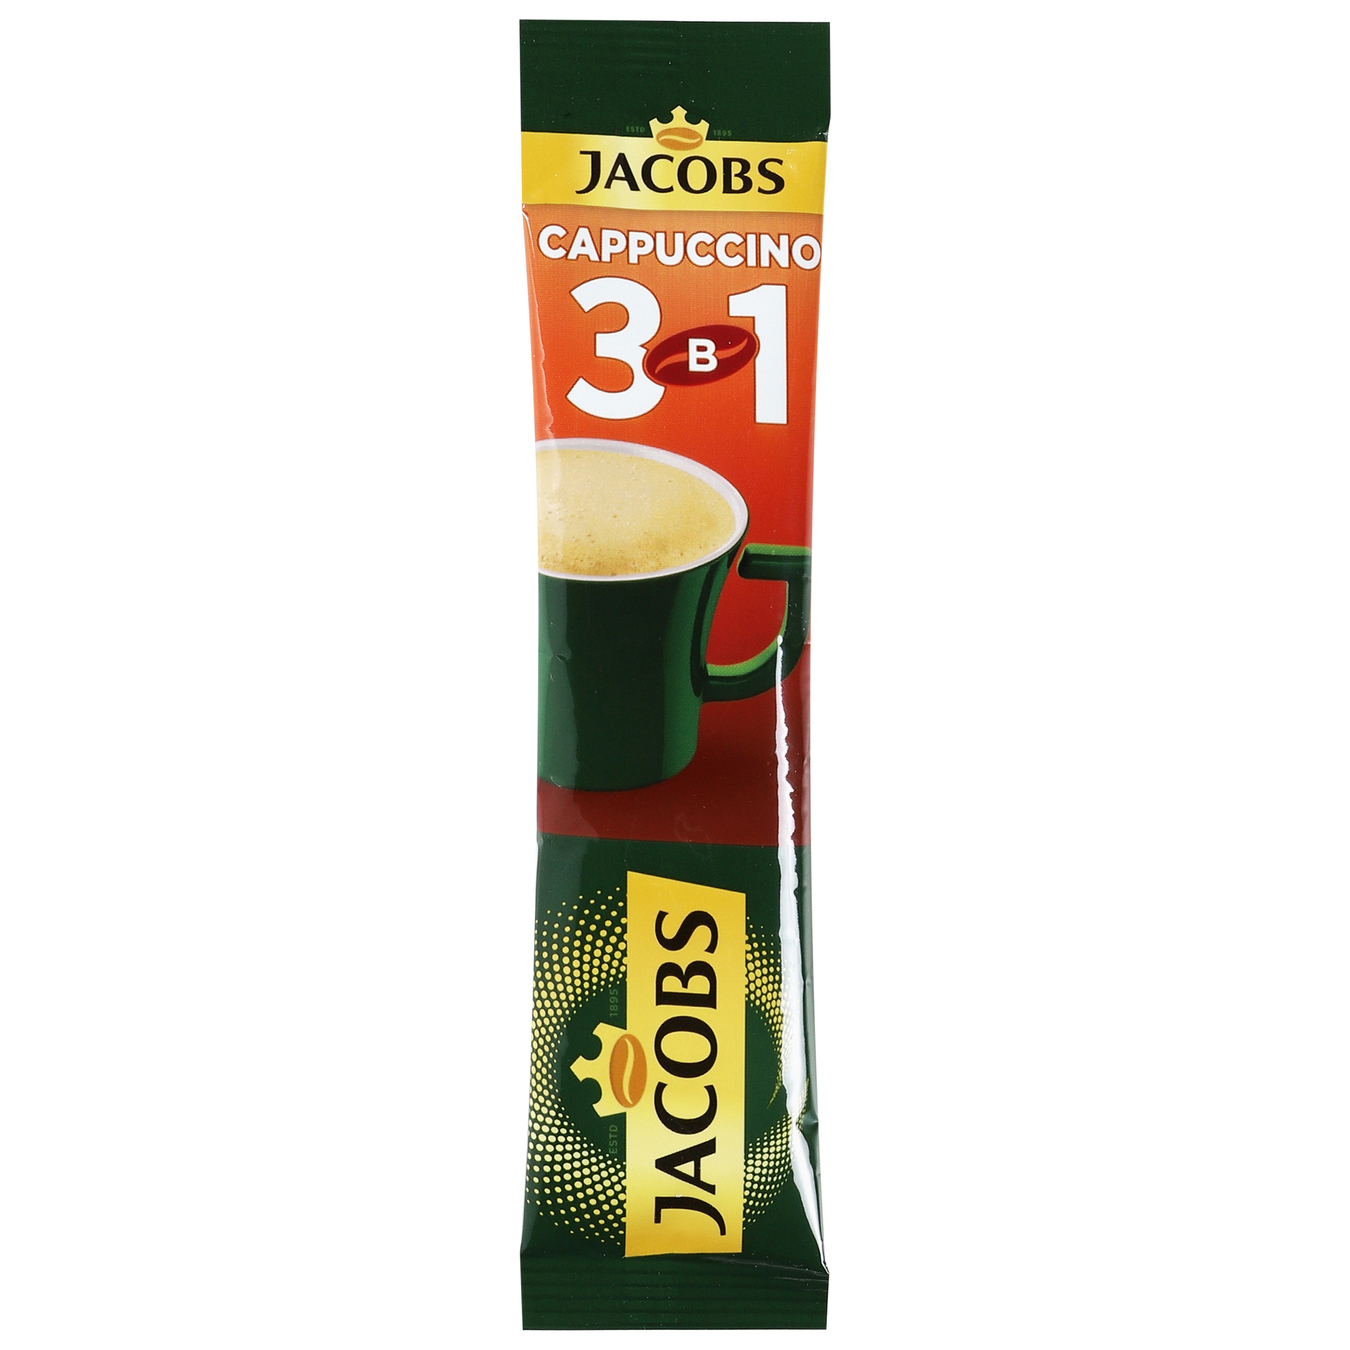 Coffee drink Jacobs Cappuccino 3in1 soluble 12.5g